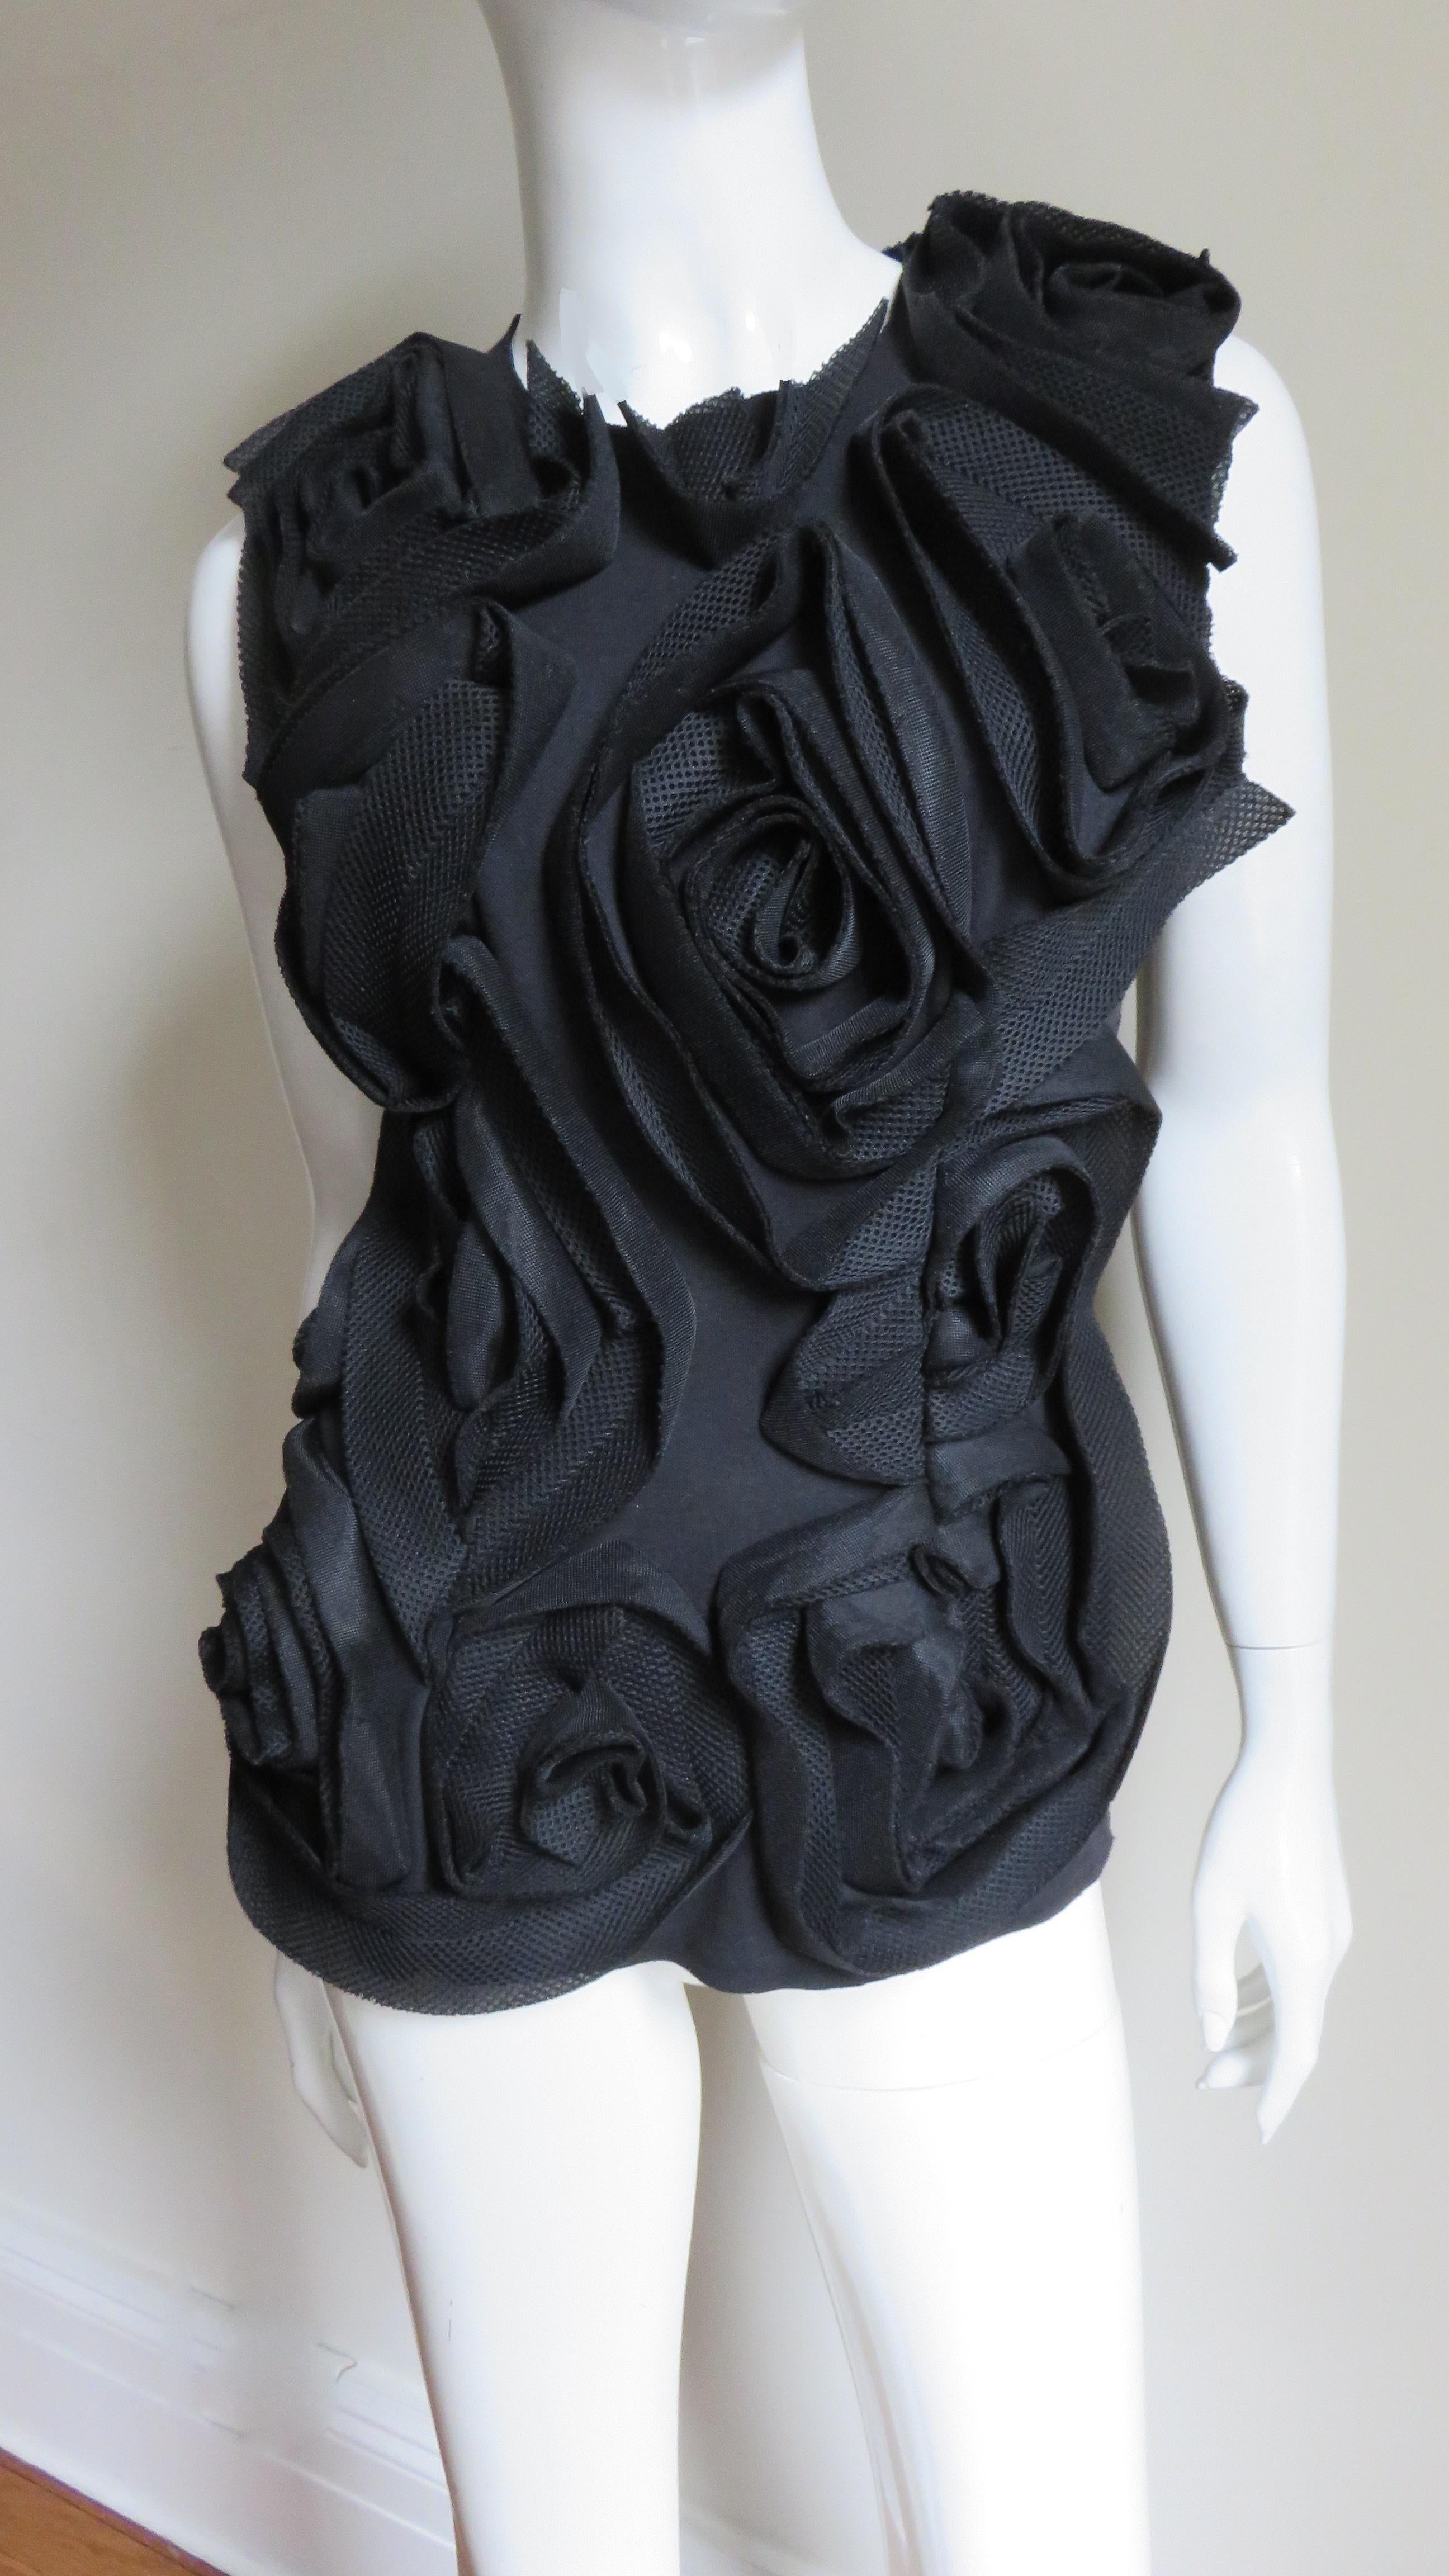 A fabulous sleeveless black jersey top, the front covered in applique black roses from Comme des Garcons, CDG.  It has a silver side zipper.  
Fits sizes Small, Medium.  Marked size S.

Bust  36-38